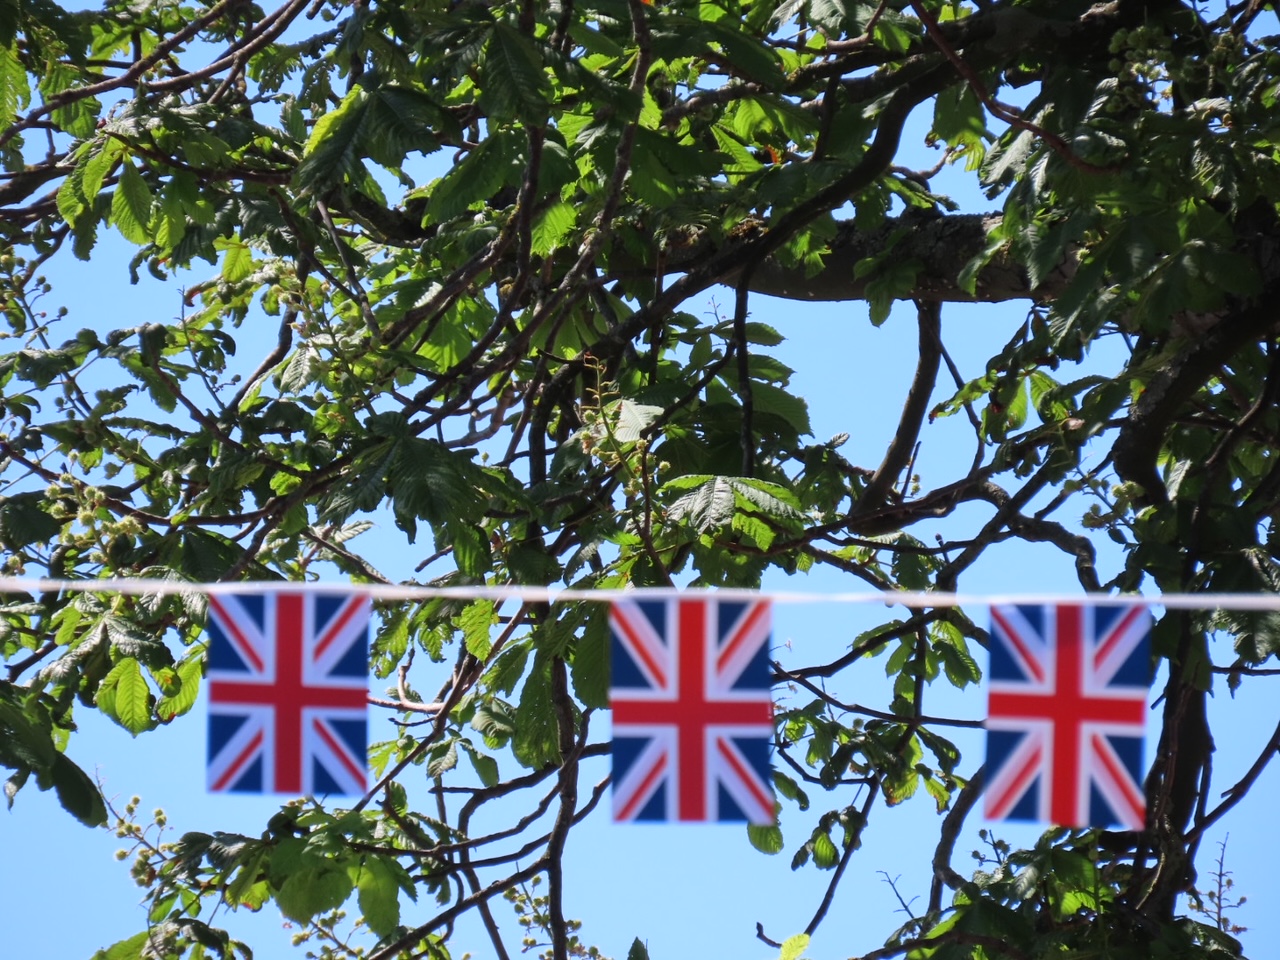 Formby Village has been decorated with hundreds of metres of bunting to celebrate The Queens Platinum Jubilee by IllumiDex UK Ltd. Photo by Andrew Brown Media